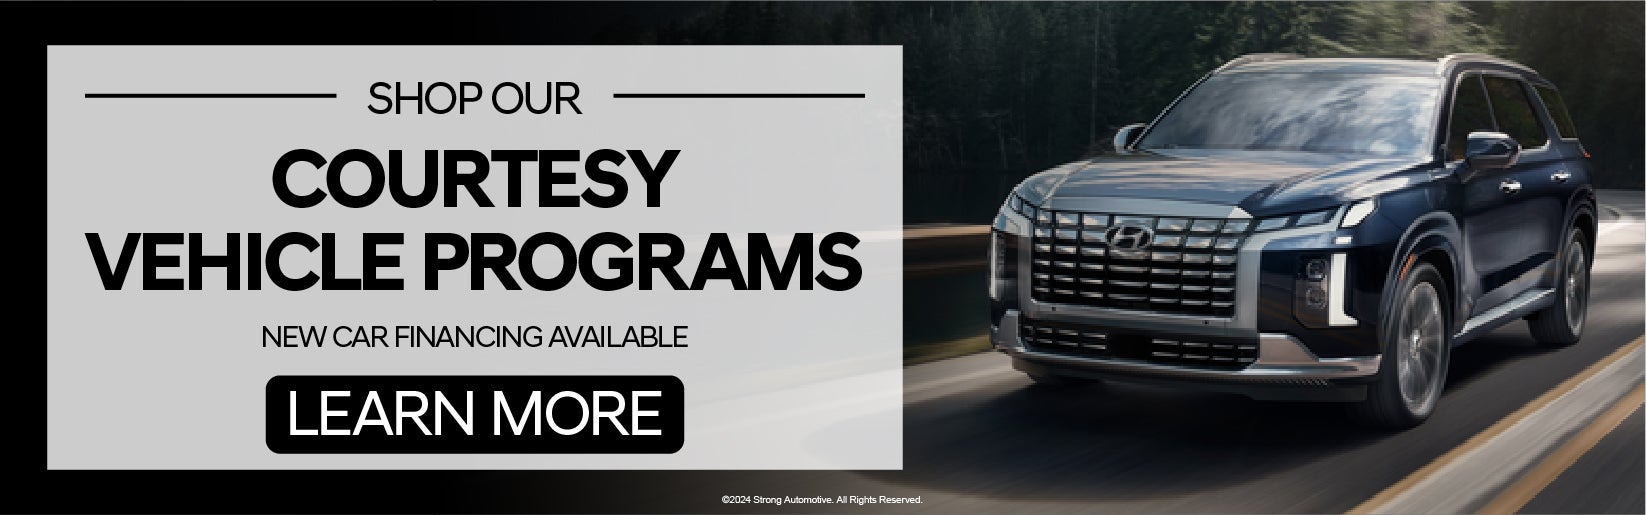 Shop our courtesy vehicle programs - Learn More